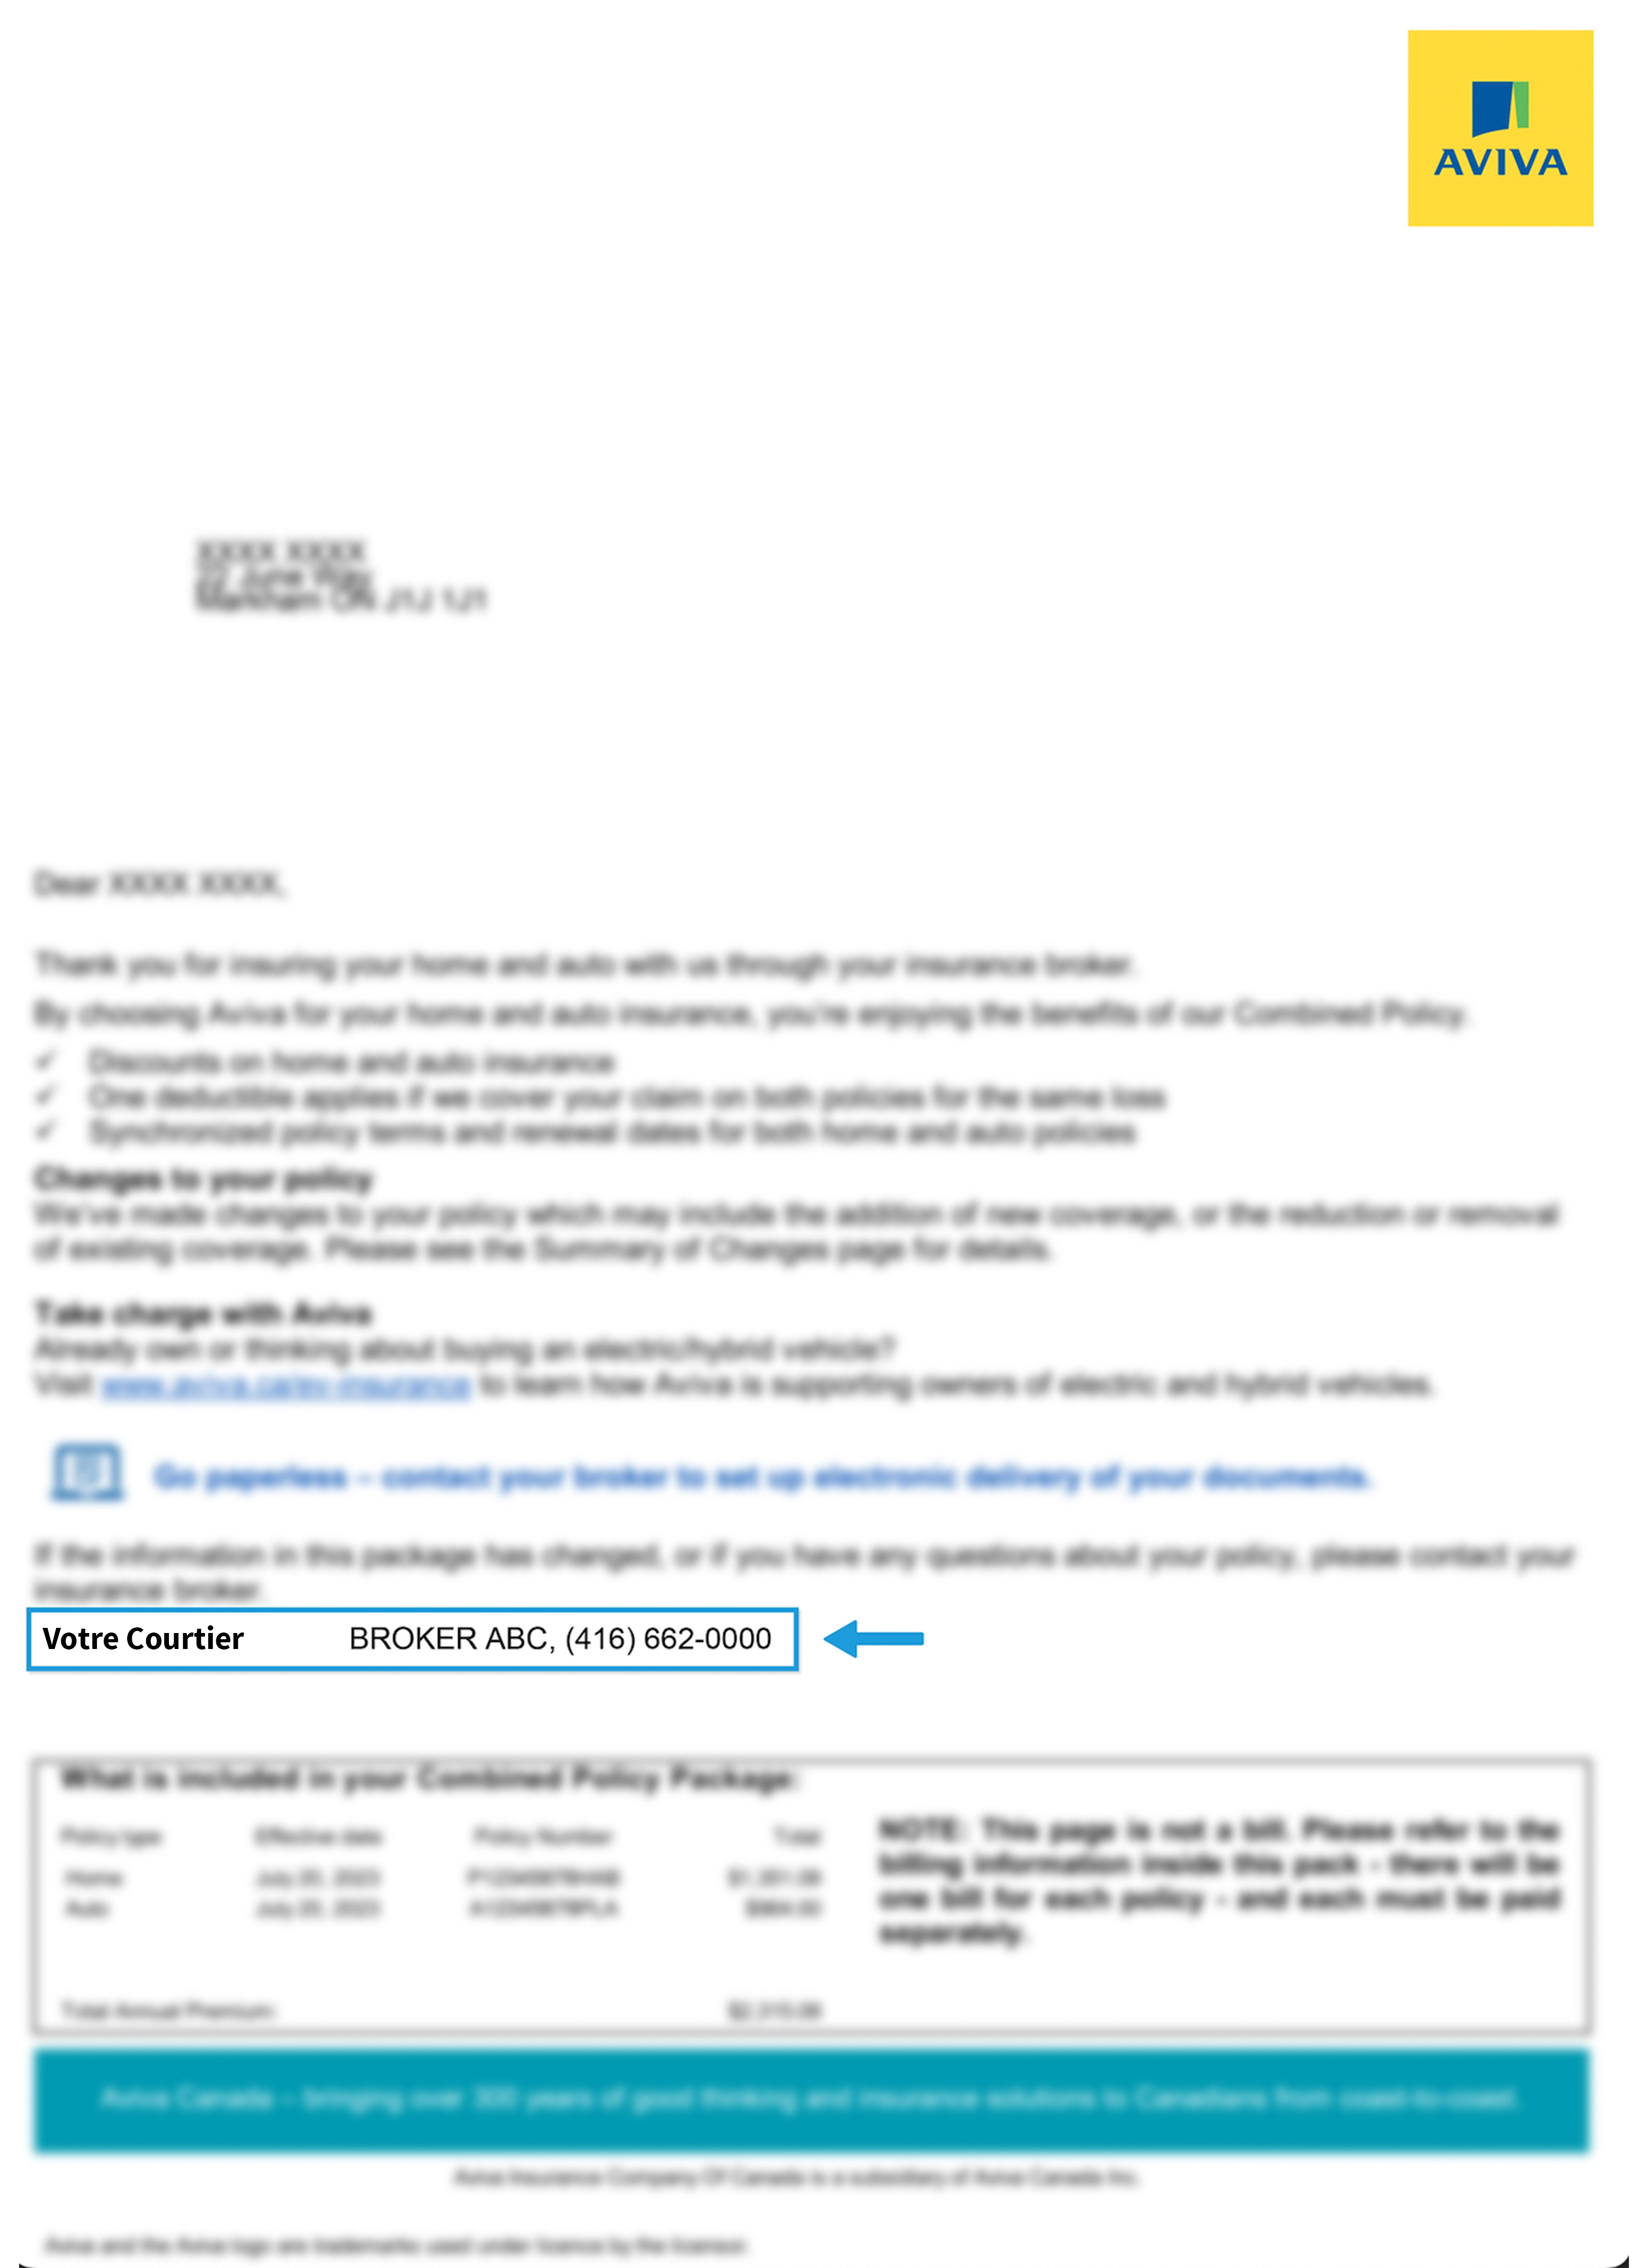 Blurred broker policy document highlighting Your Insurance Broker details